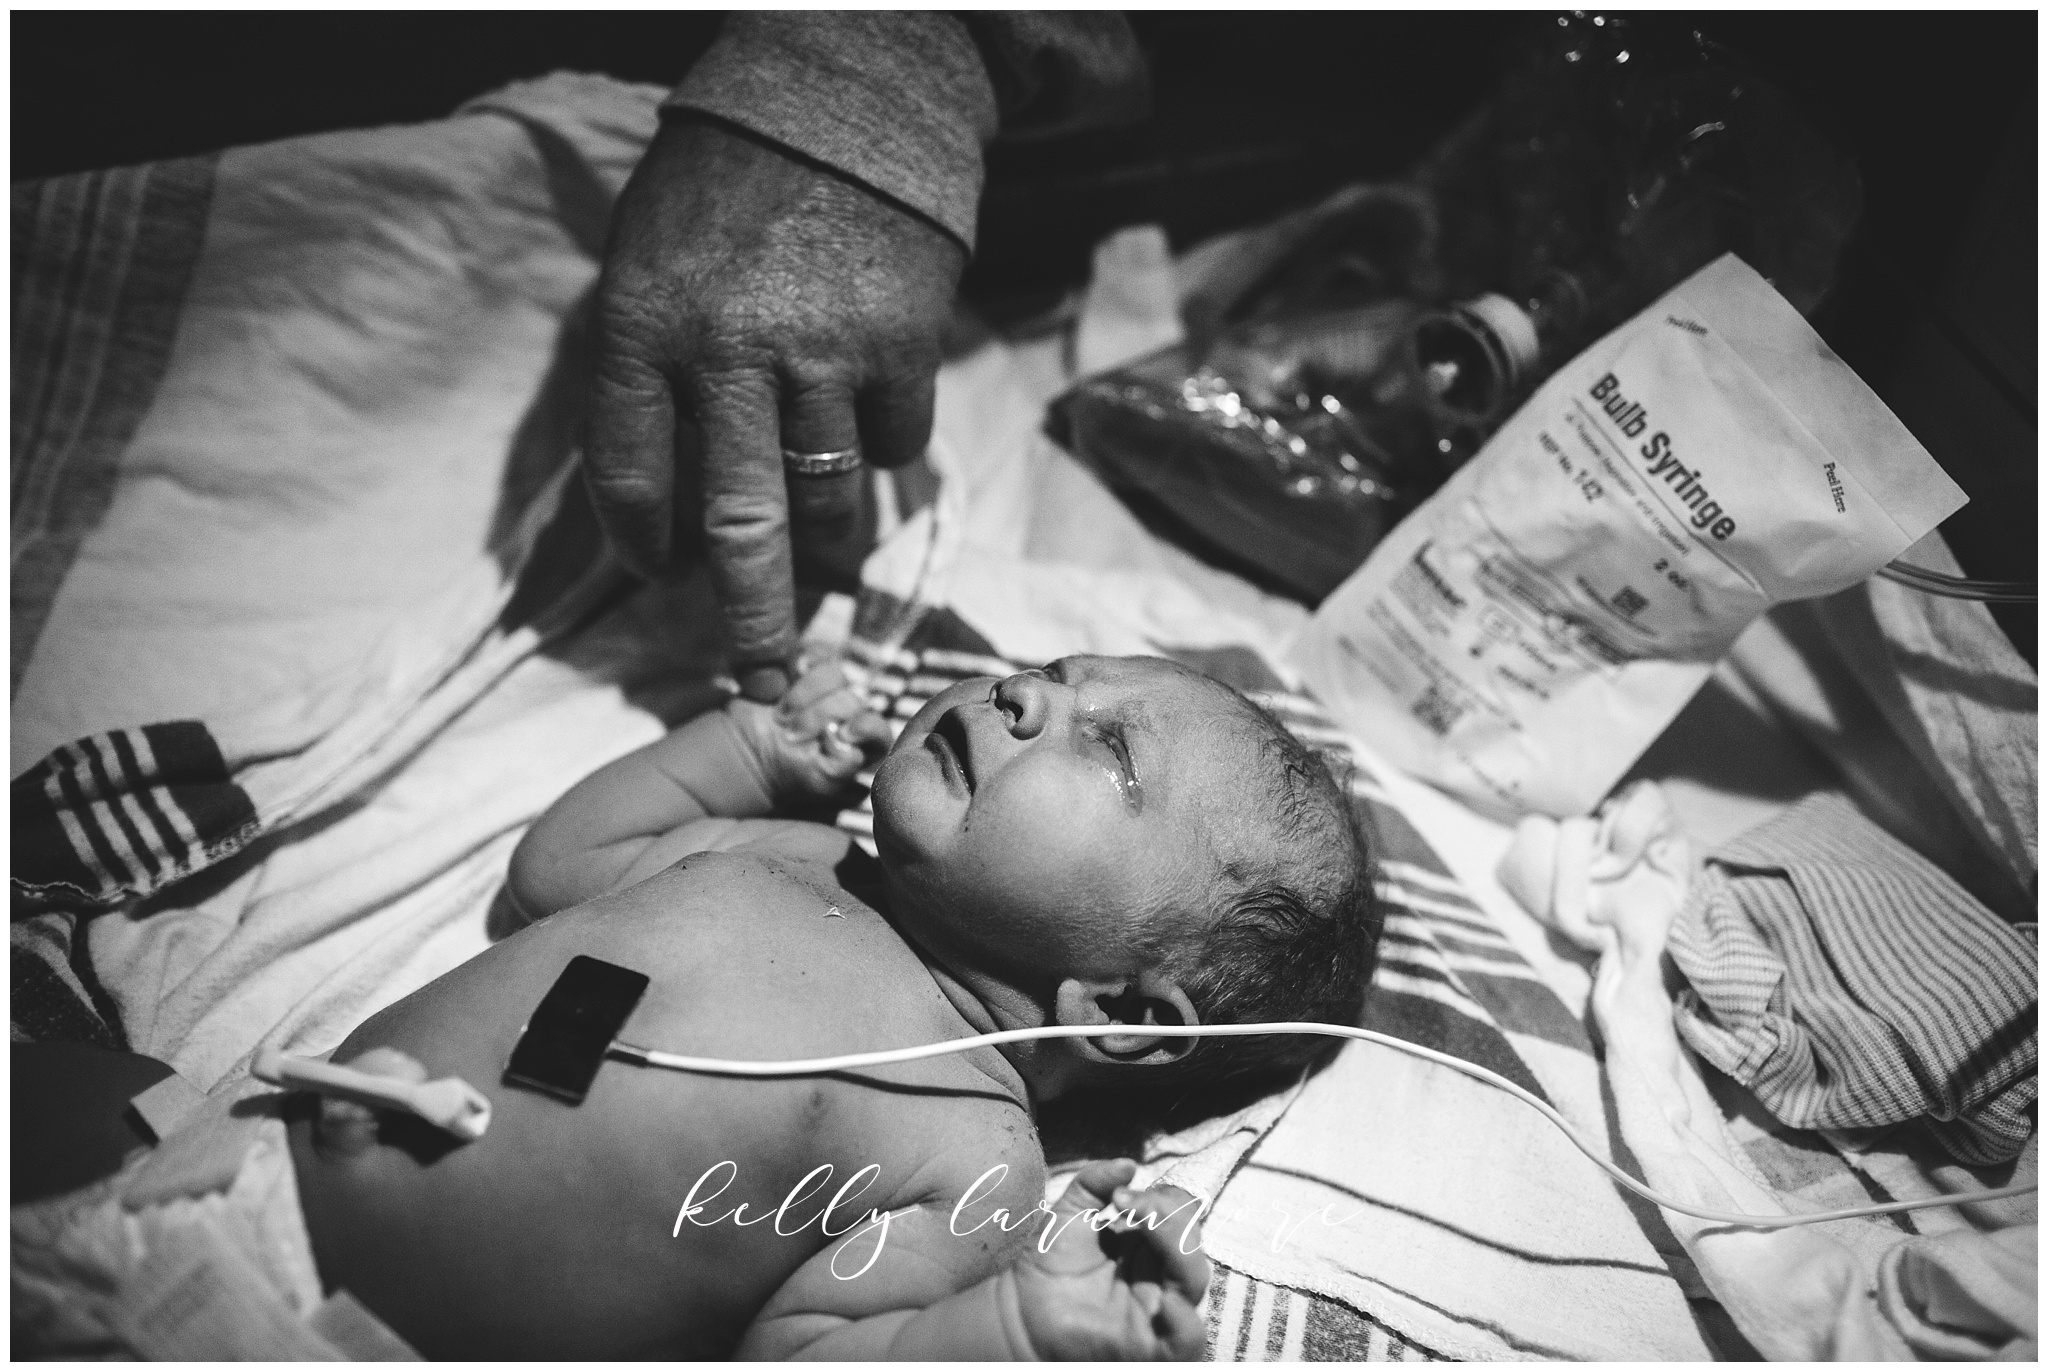 st louis birth story photographer, st louis family photographer, missouri baptist birth center birth, delivery room, baby and dad holding hands